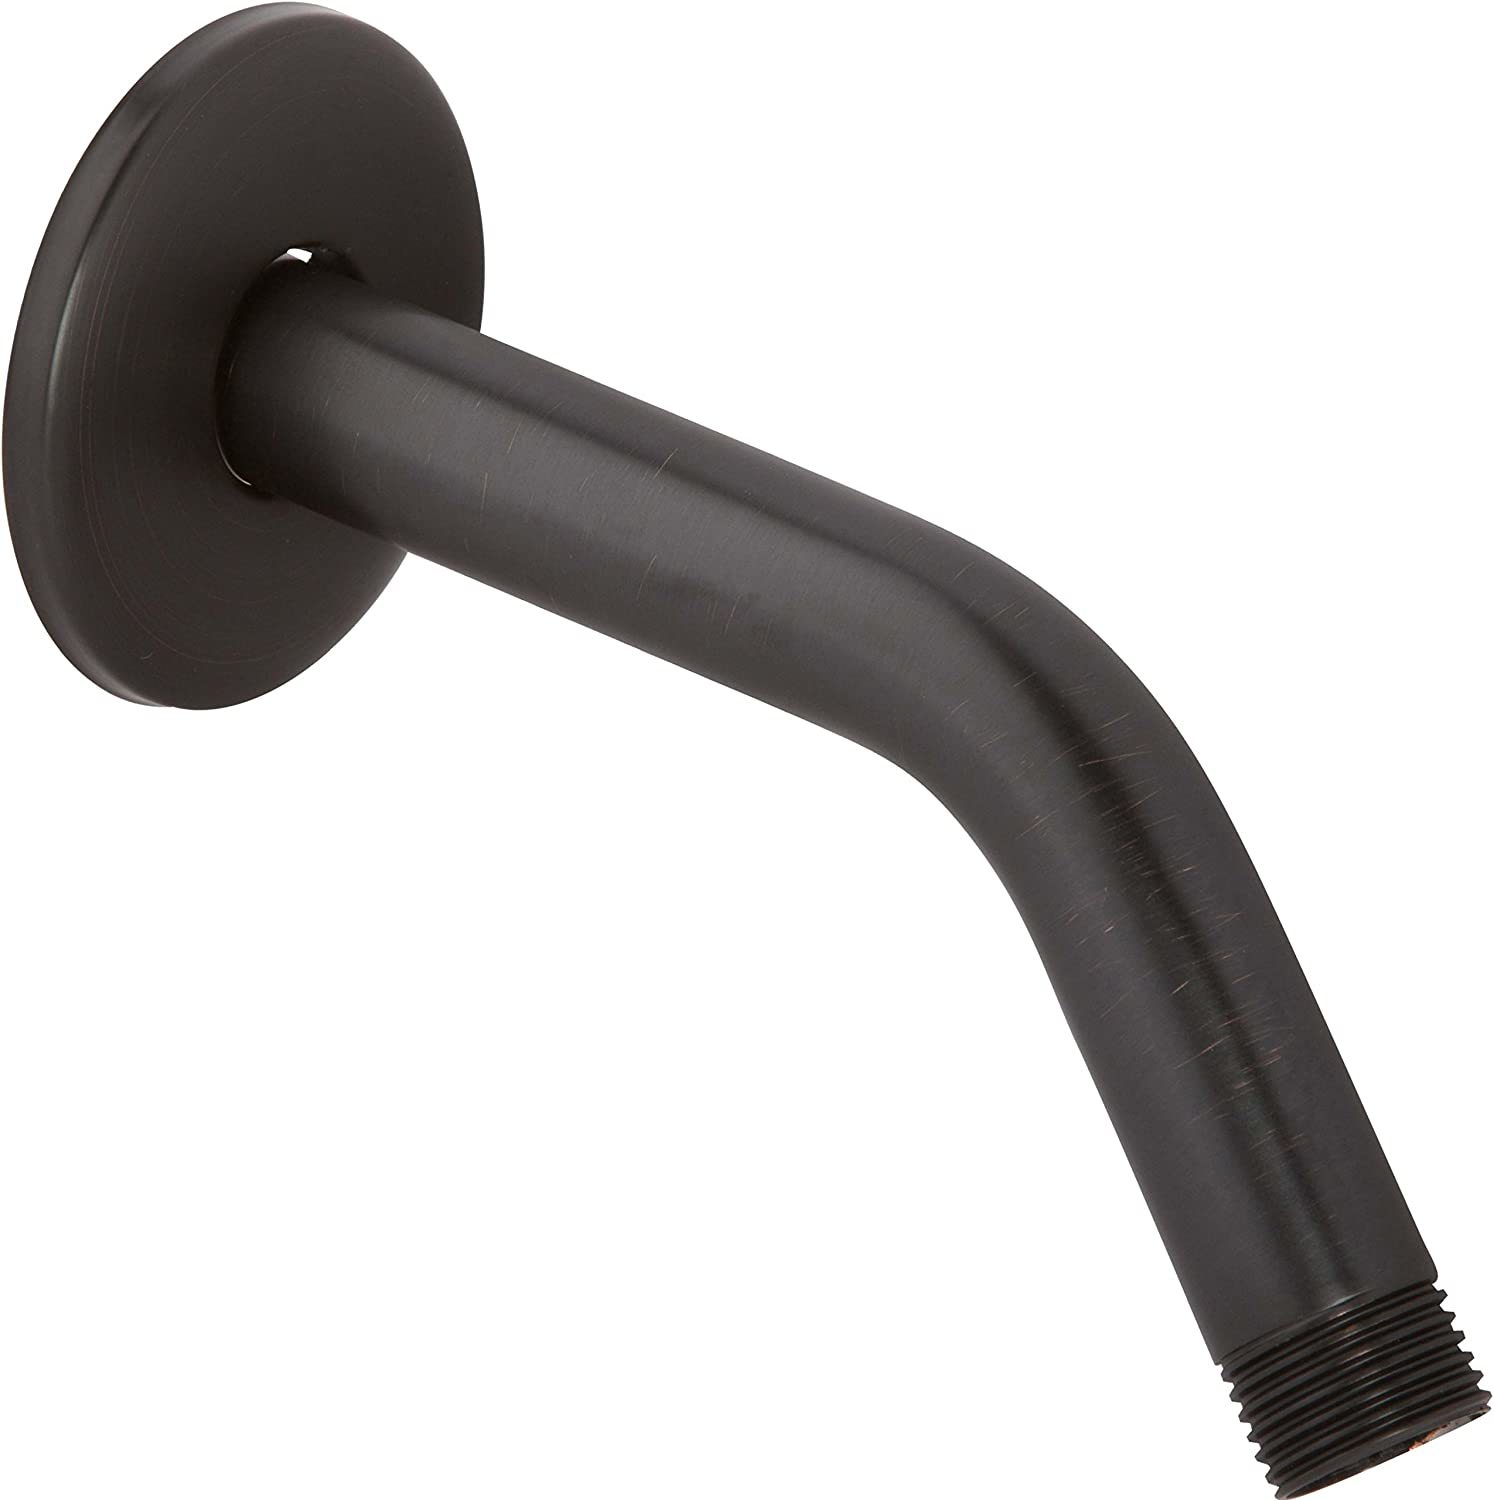 Primary image for 6 Inch Shower Arm And Flange - Solid Stainless Steel,, Rubbed Bronze